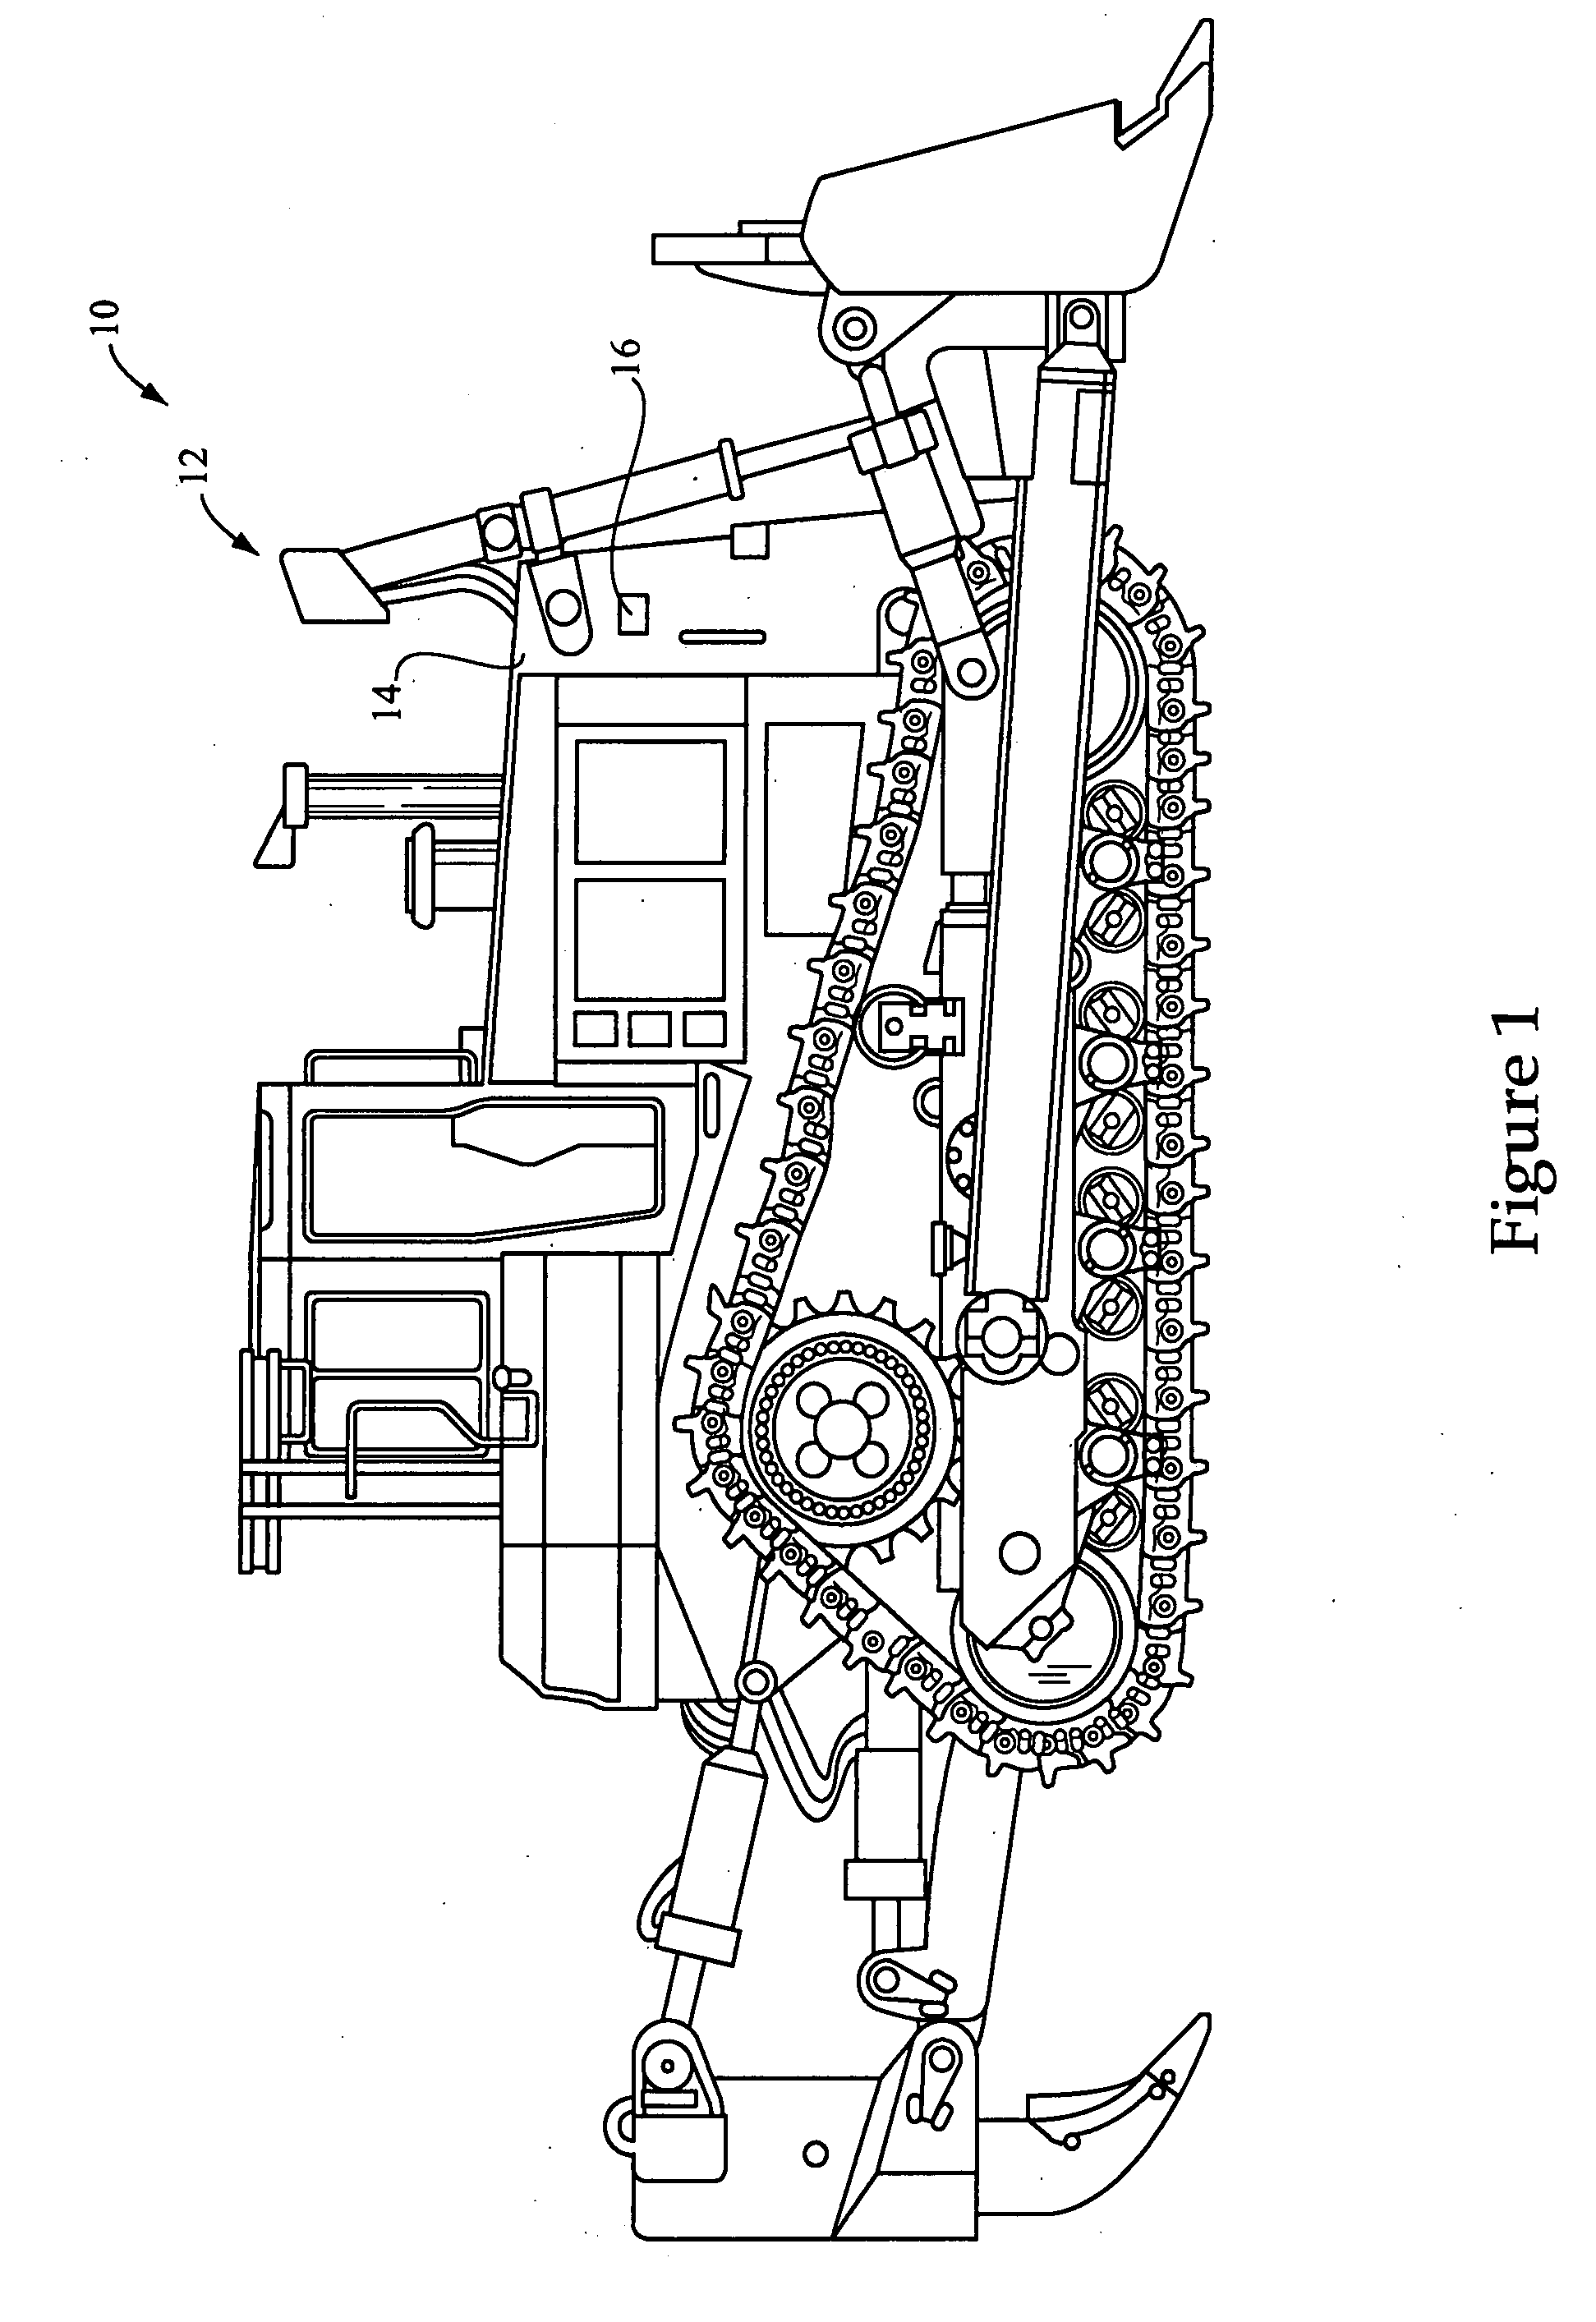 Slot adapter for cleaning heat exchanger system and machine using same